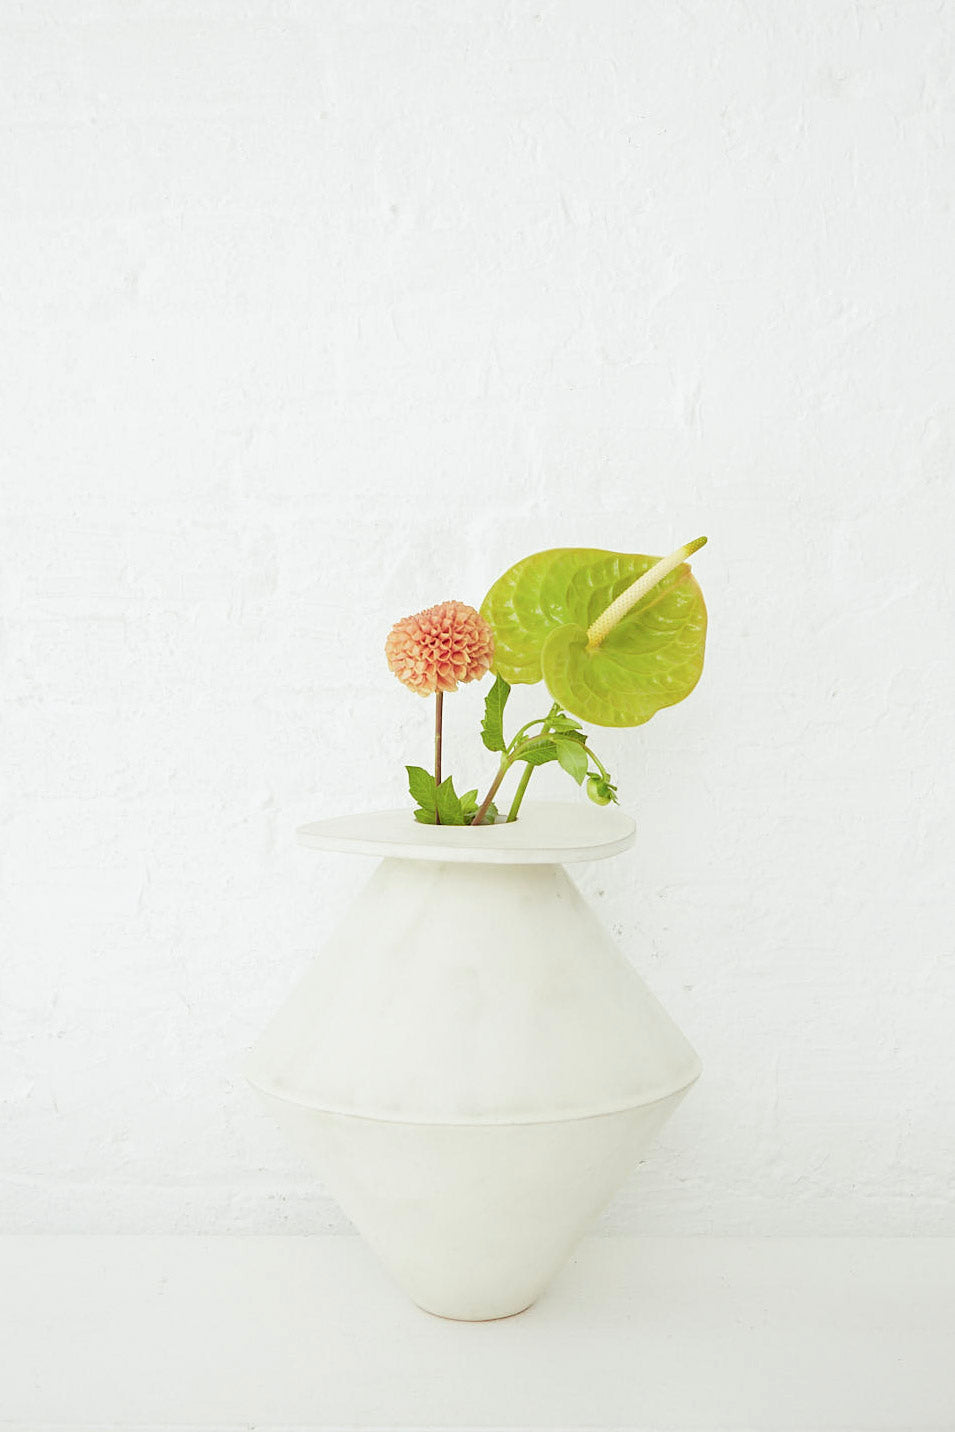 A Jumbo Diamond Vase in Cream by BZIPPY with a plant in it.